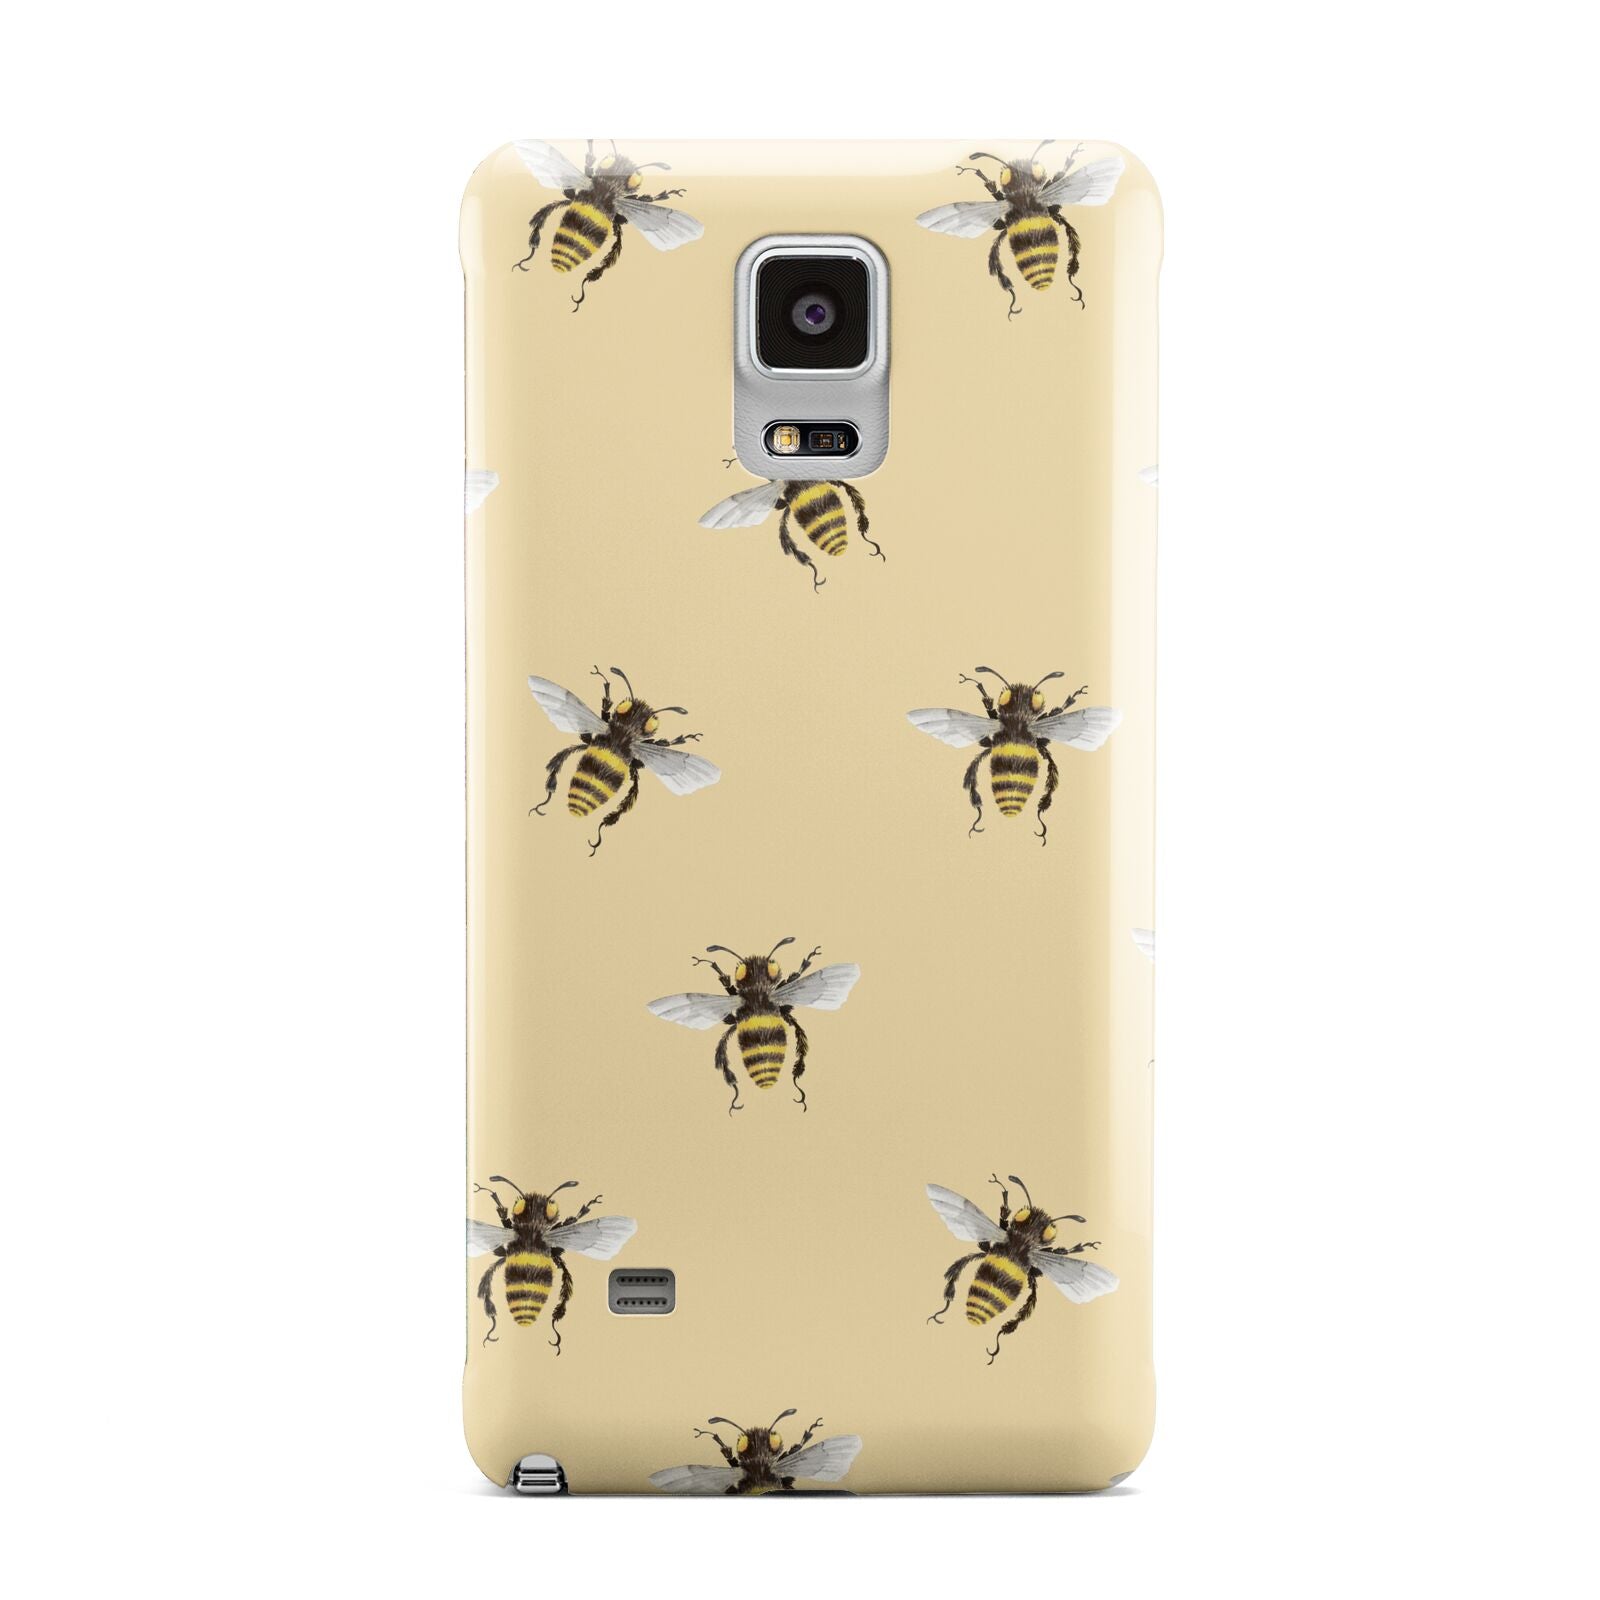 Bee Illustrations Samsung Galaxy Note 4 Case